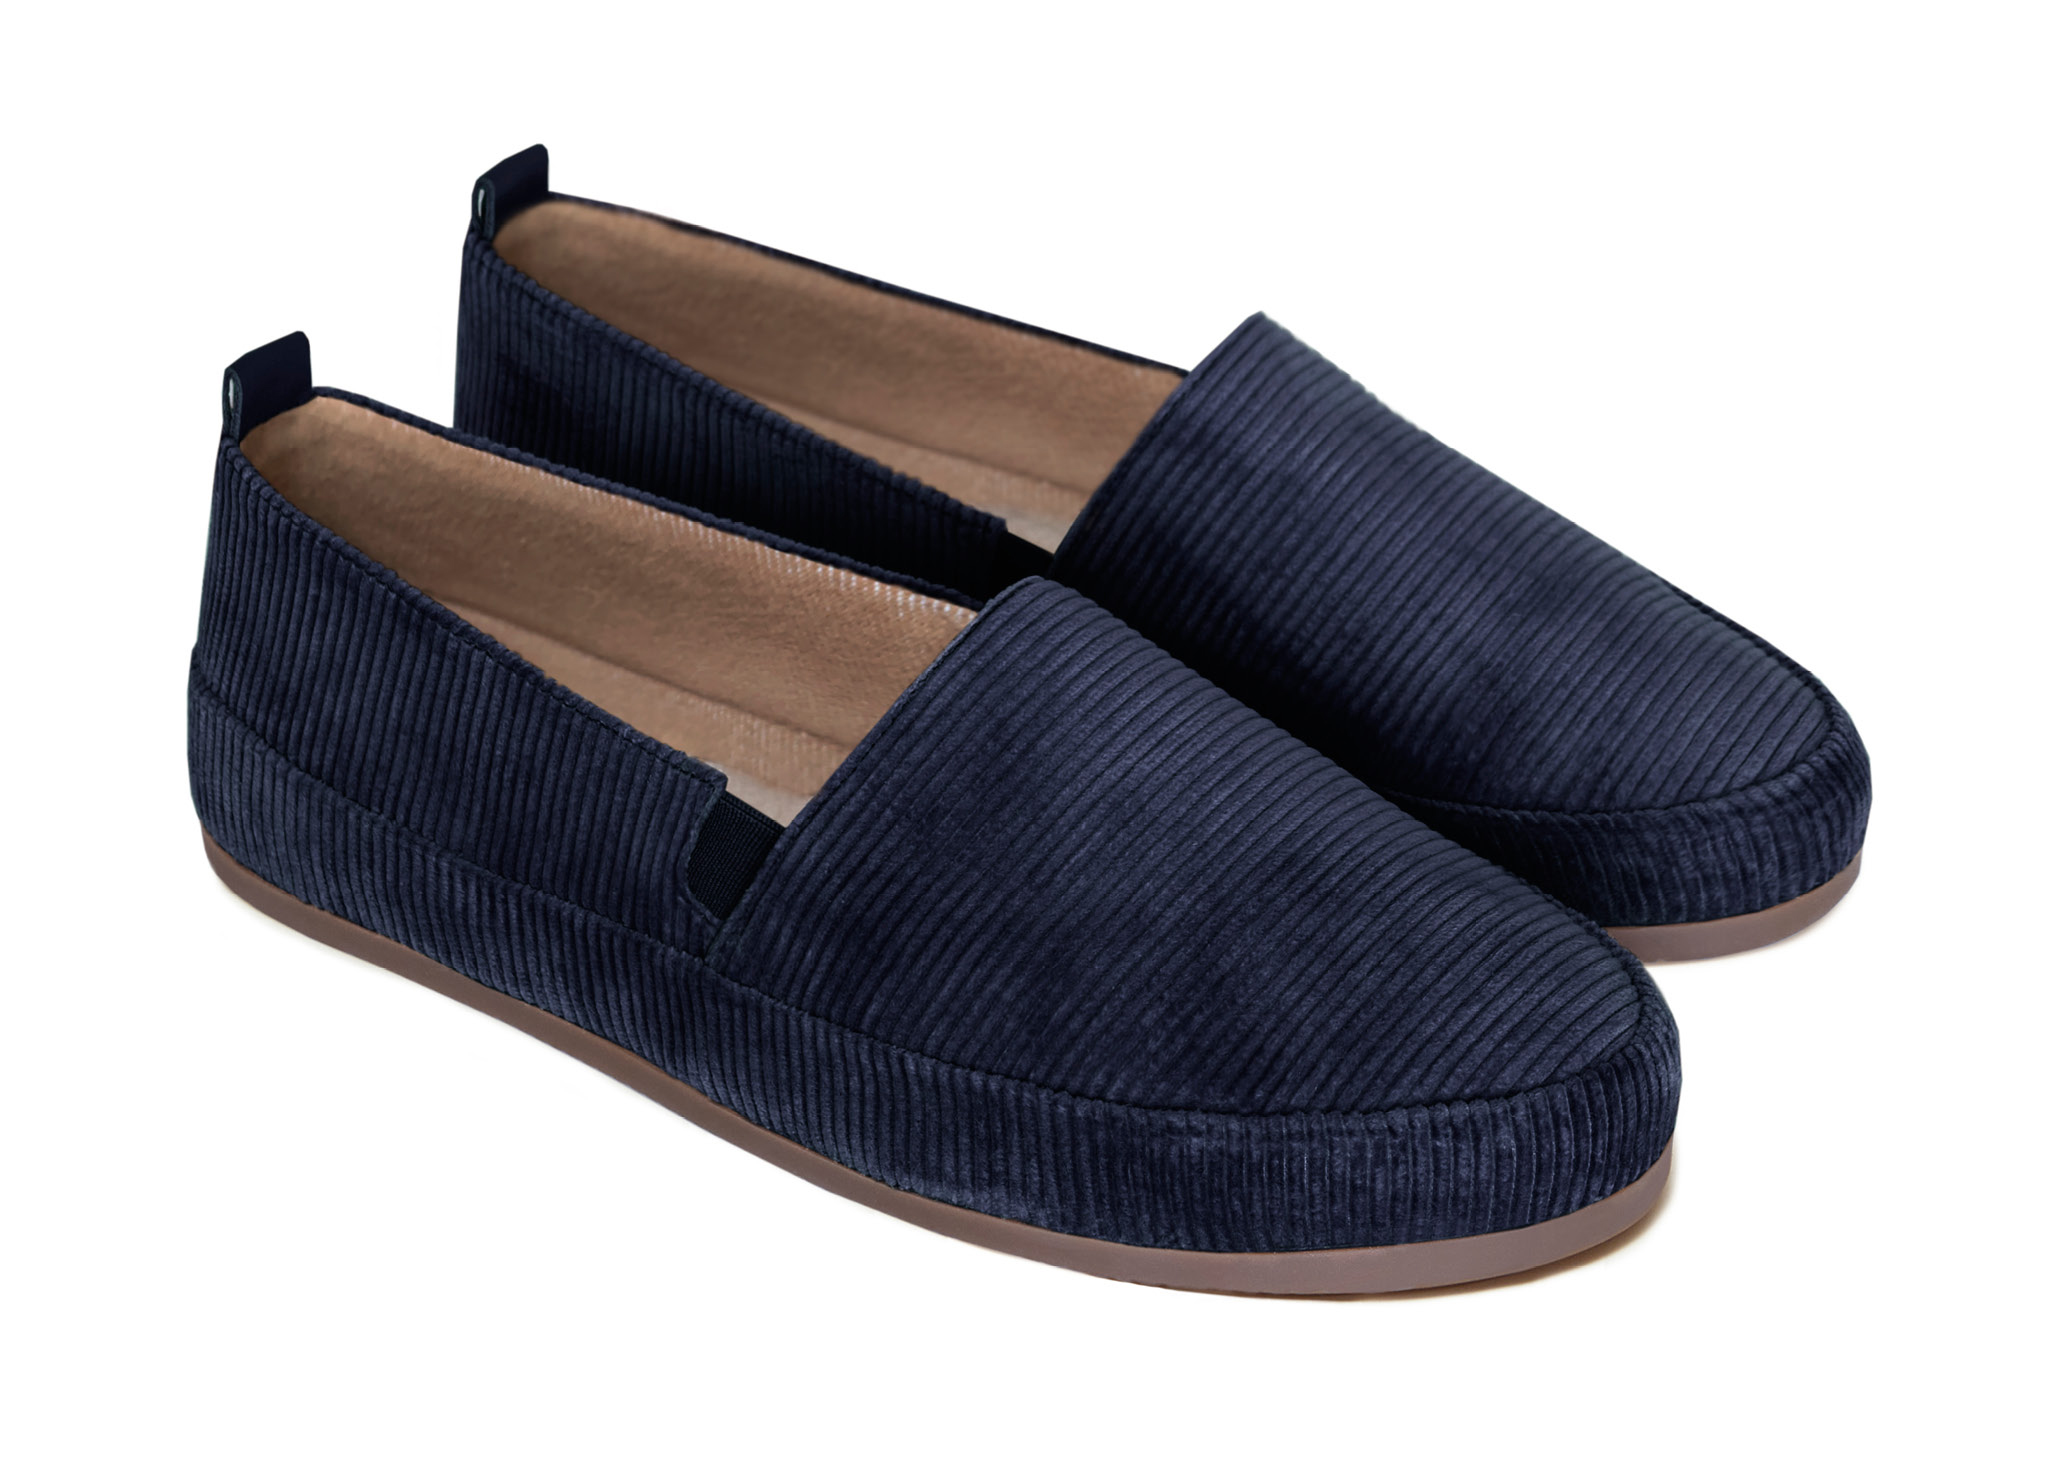 Blue Slippers for Men in Corduroy | MULO shoes